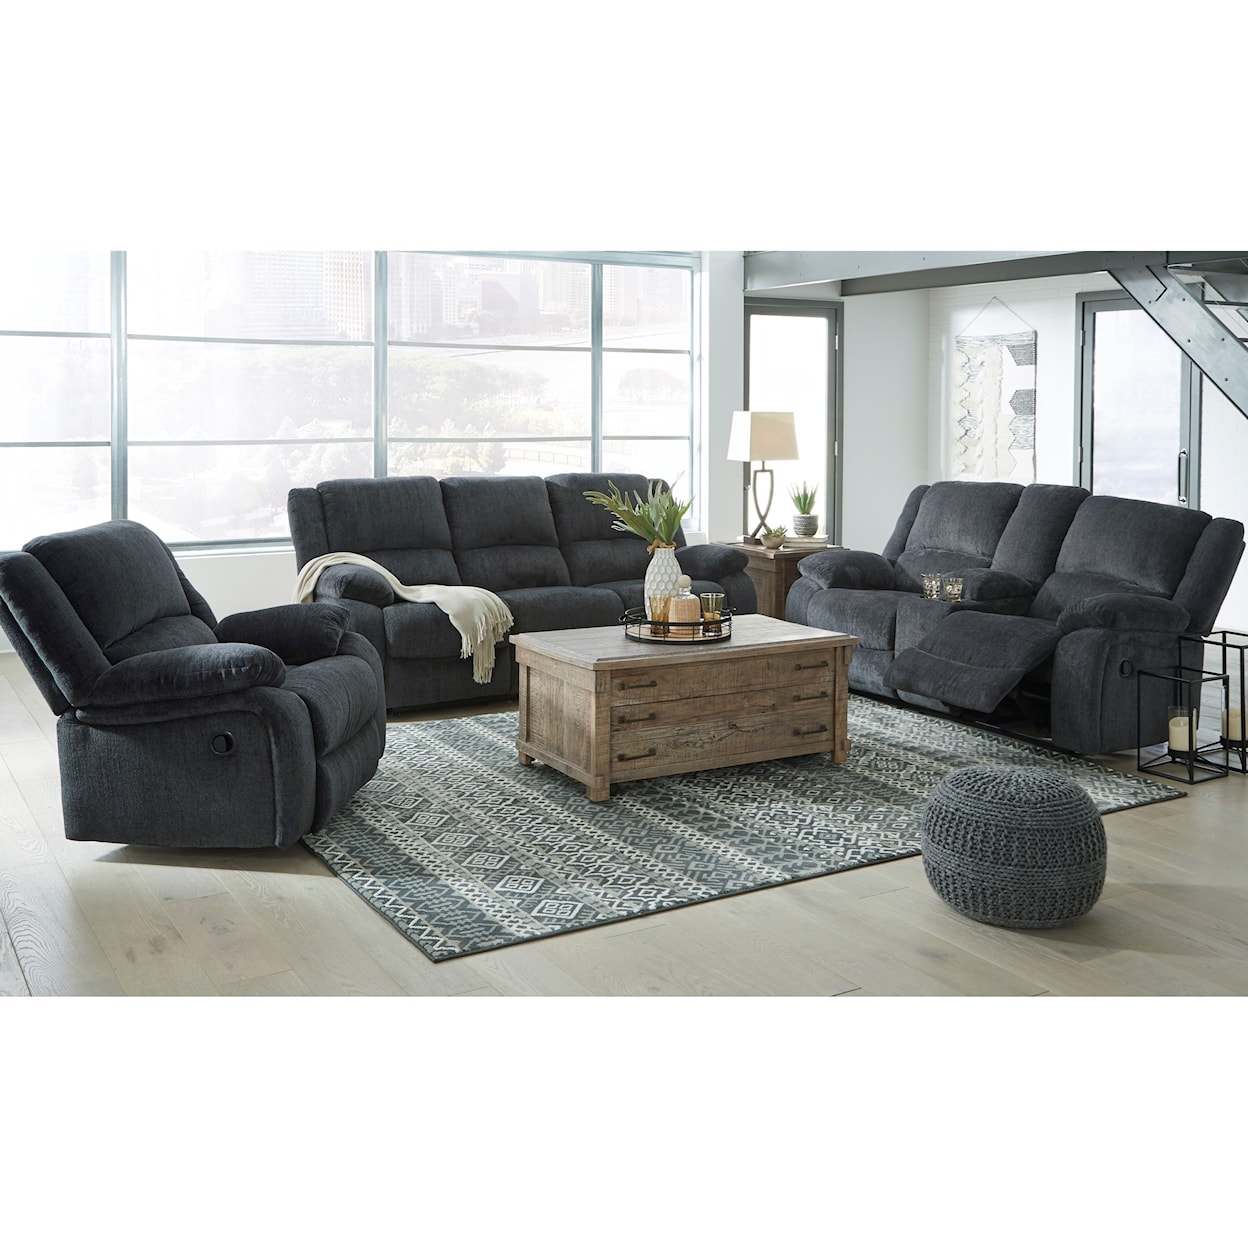 Signature Design by Ashley Draycoll Power Reclining Living Room Group